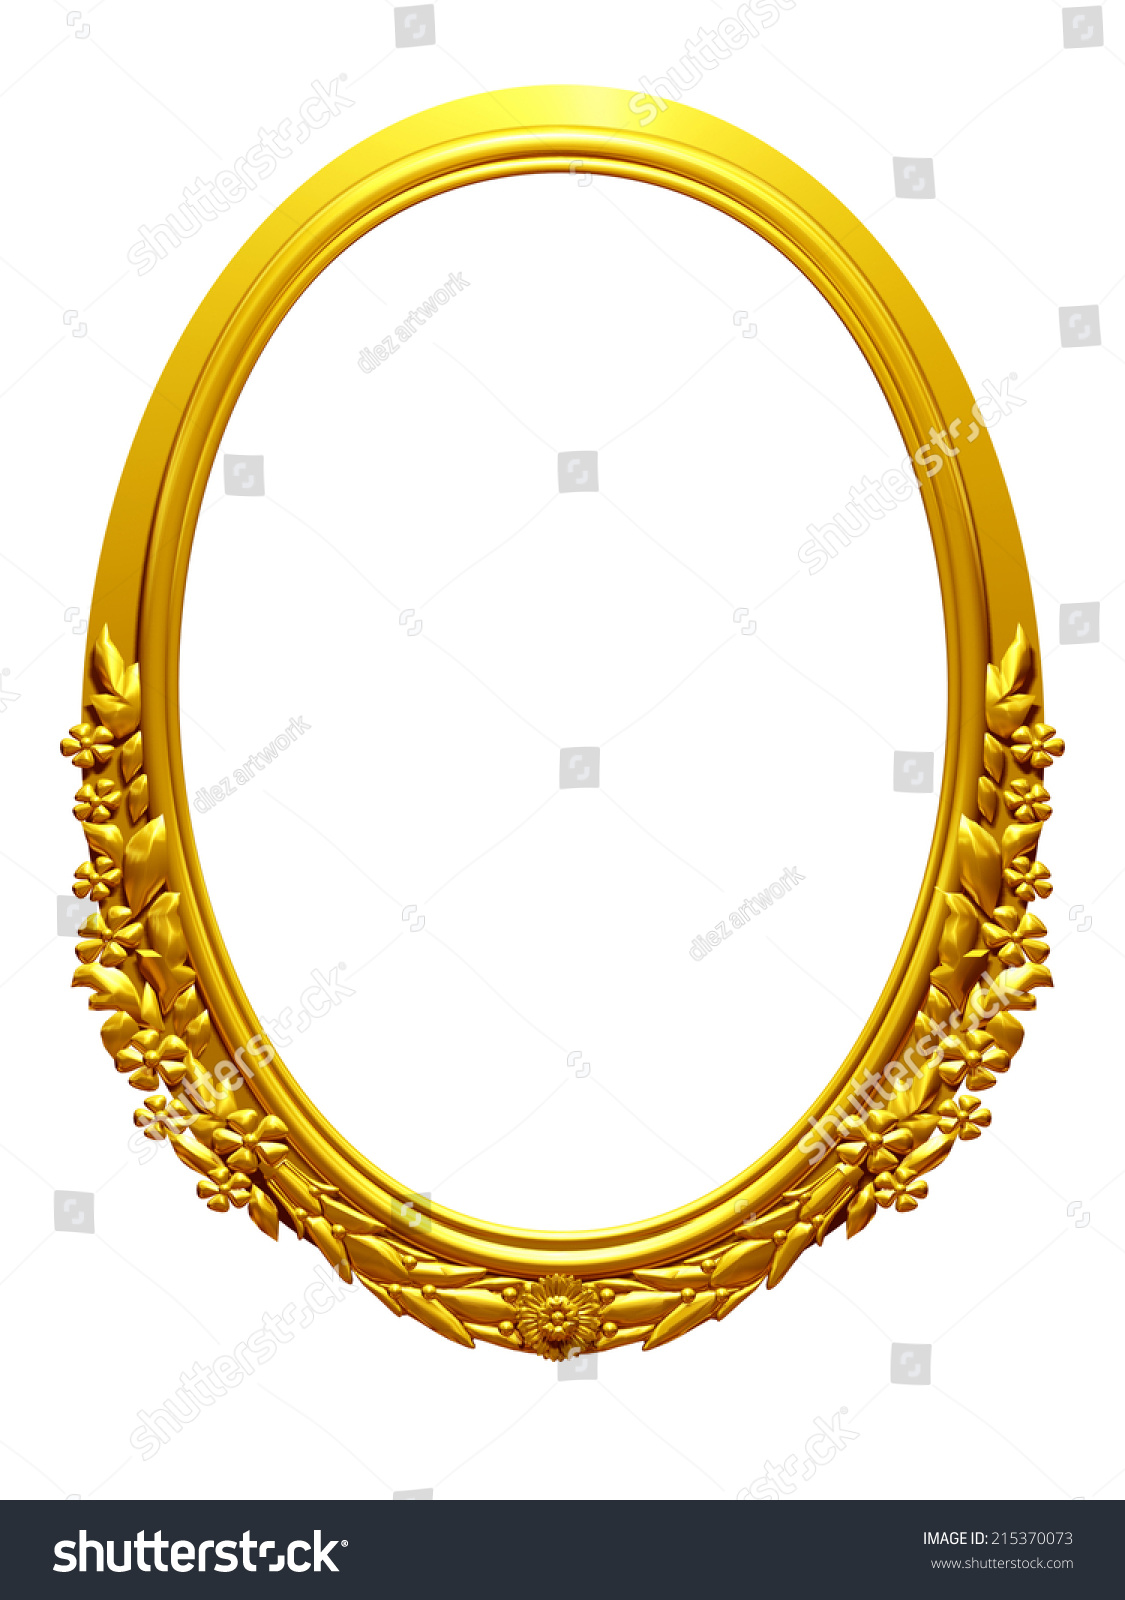 Bath & Body Works SHARE THE JOY YELLOW GOLD PICTURE FRAME OVAL PHOTO NEW 